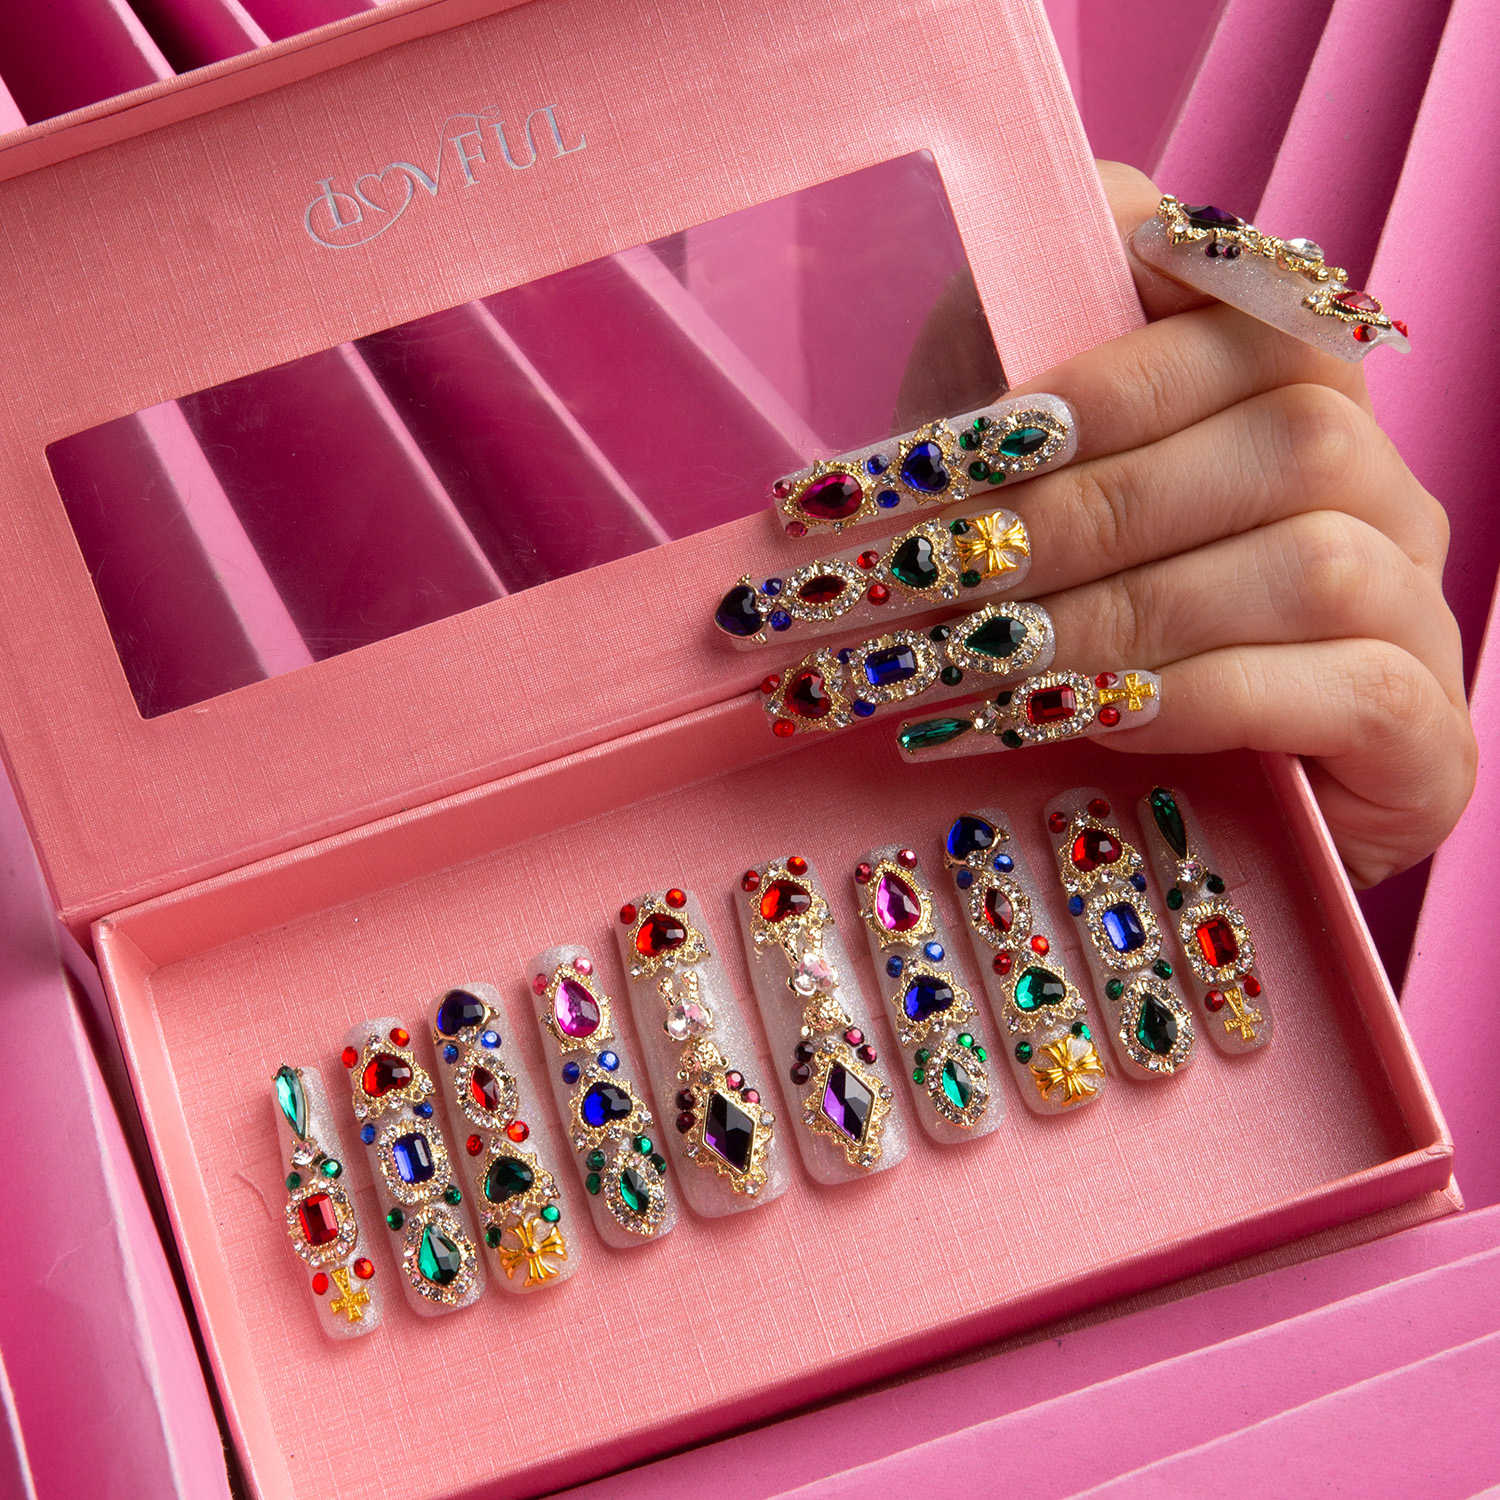 Hand wearing press-on nails adorned with colorful gems and glitter above a pink box containing a set of similar detailed and vibrant press-on nails.